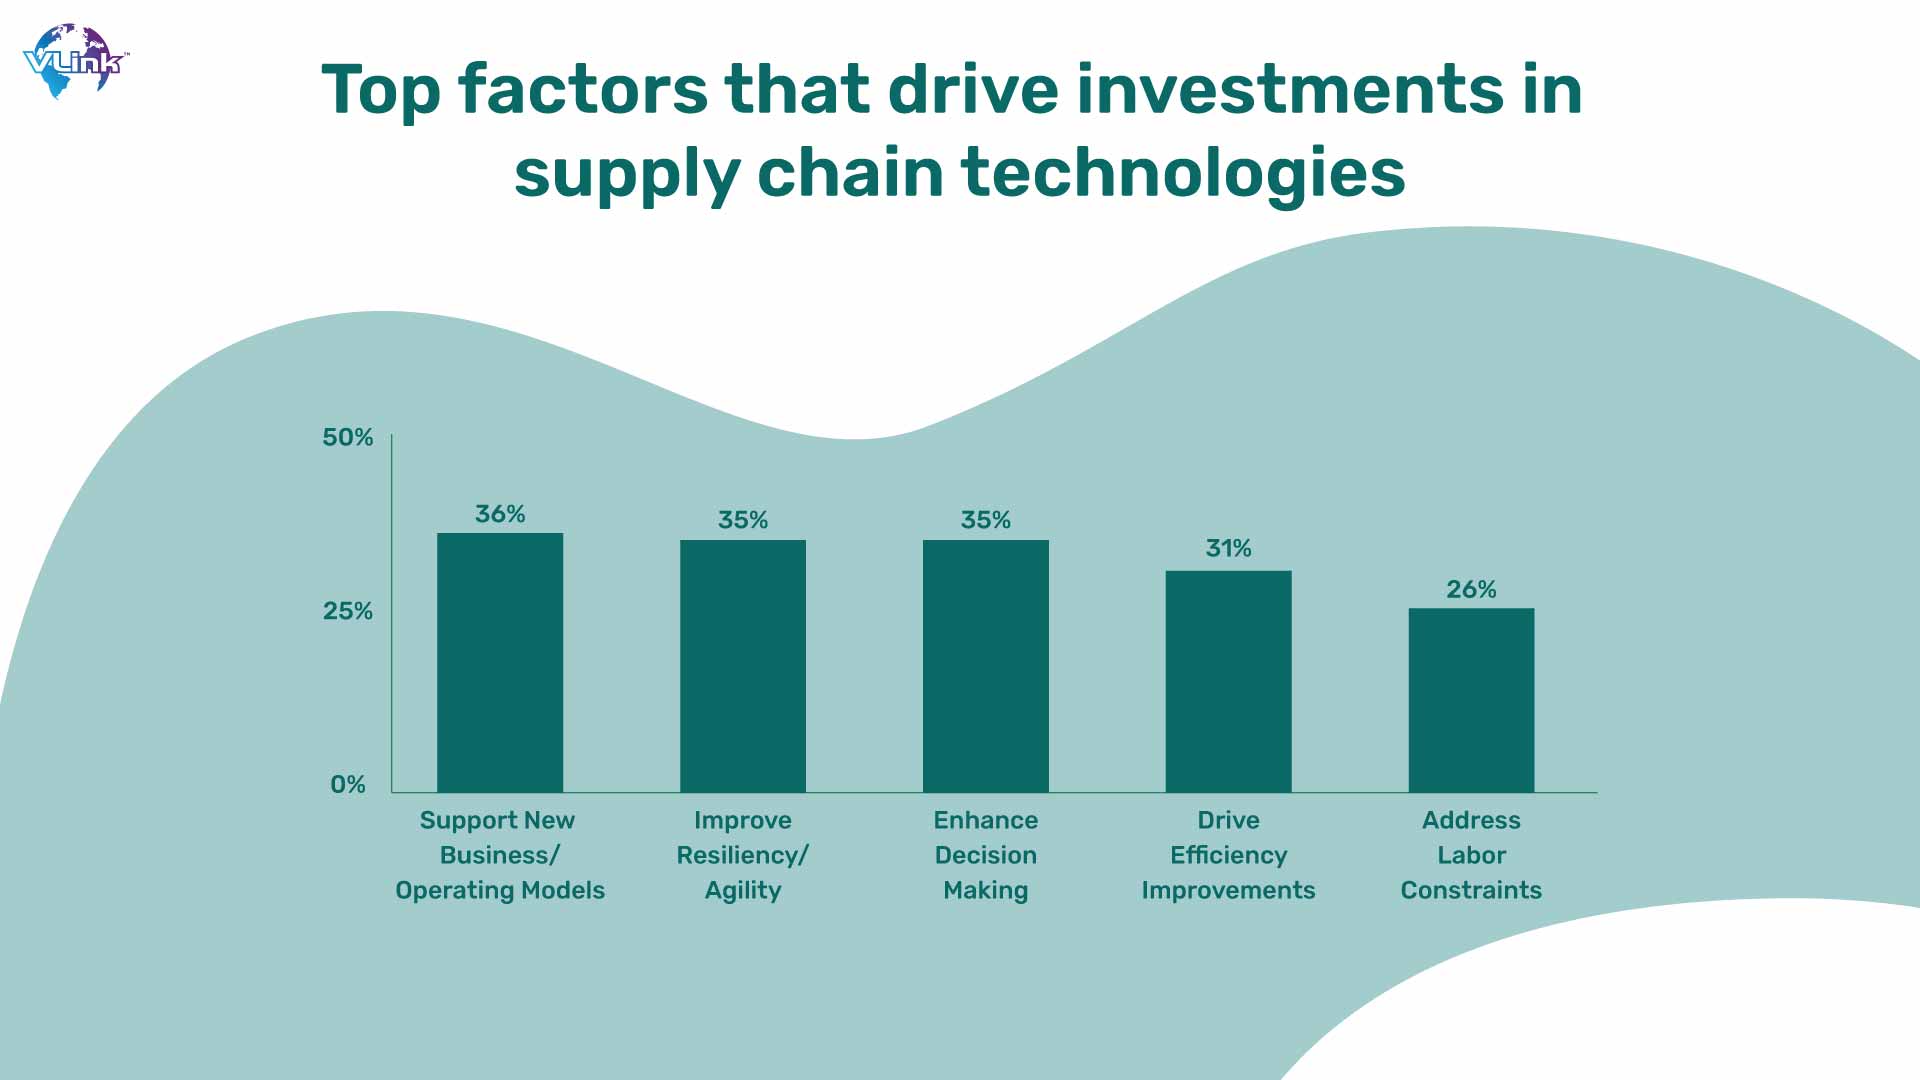 Top Factor that drive investments in supply chain technologies